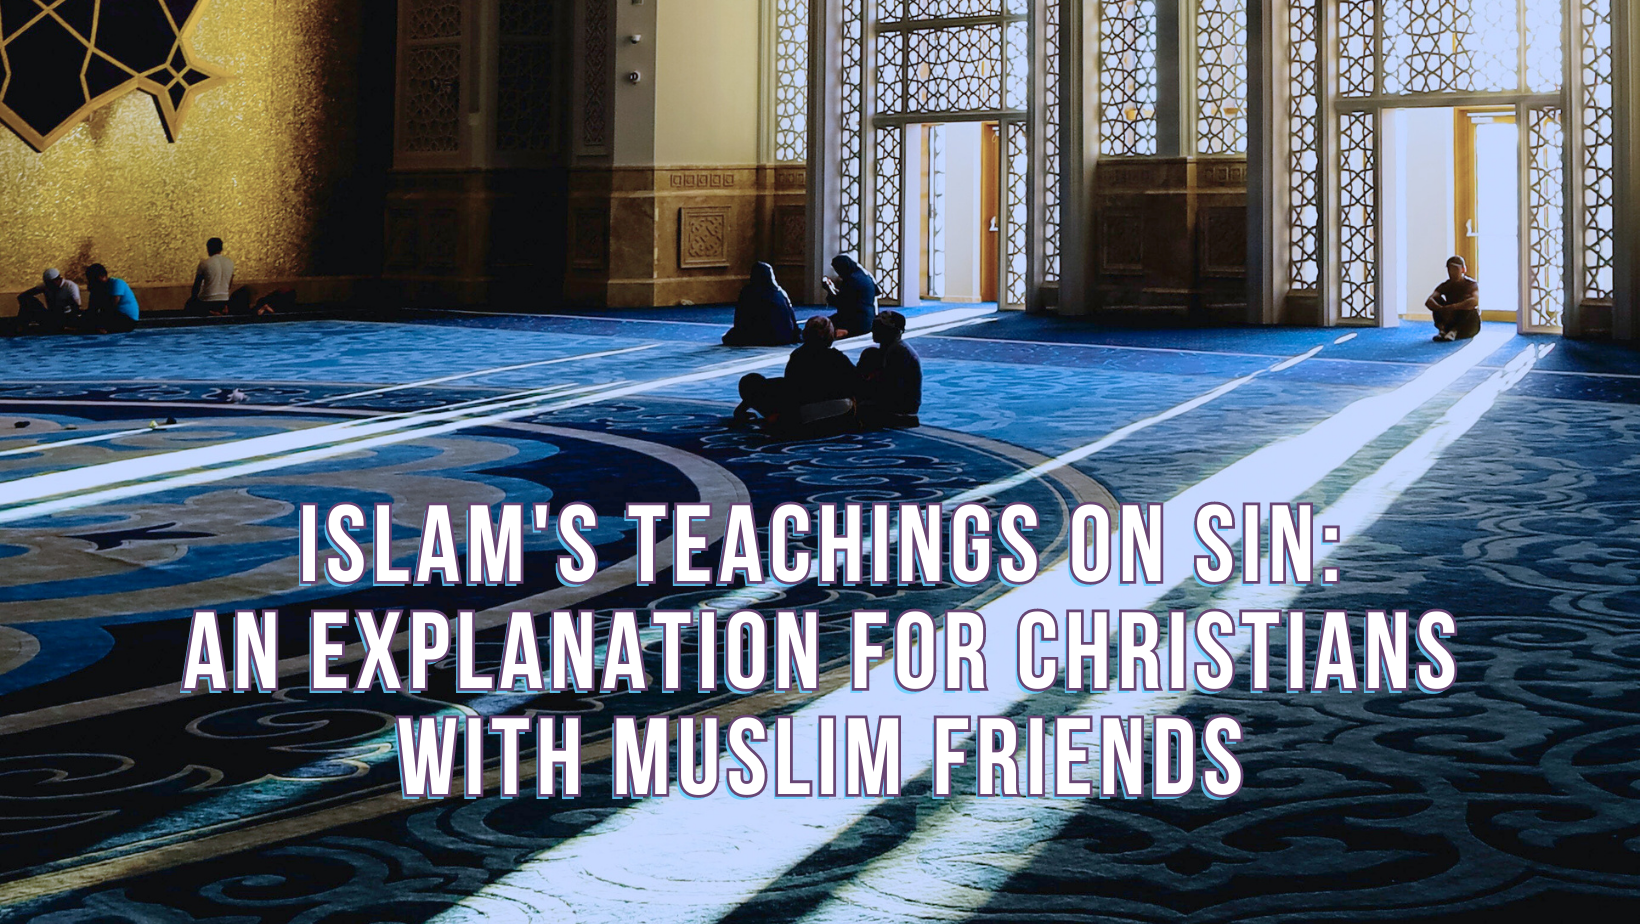 Islam's teachings on sin: An explanation for Christians with Muslim friends